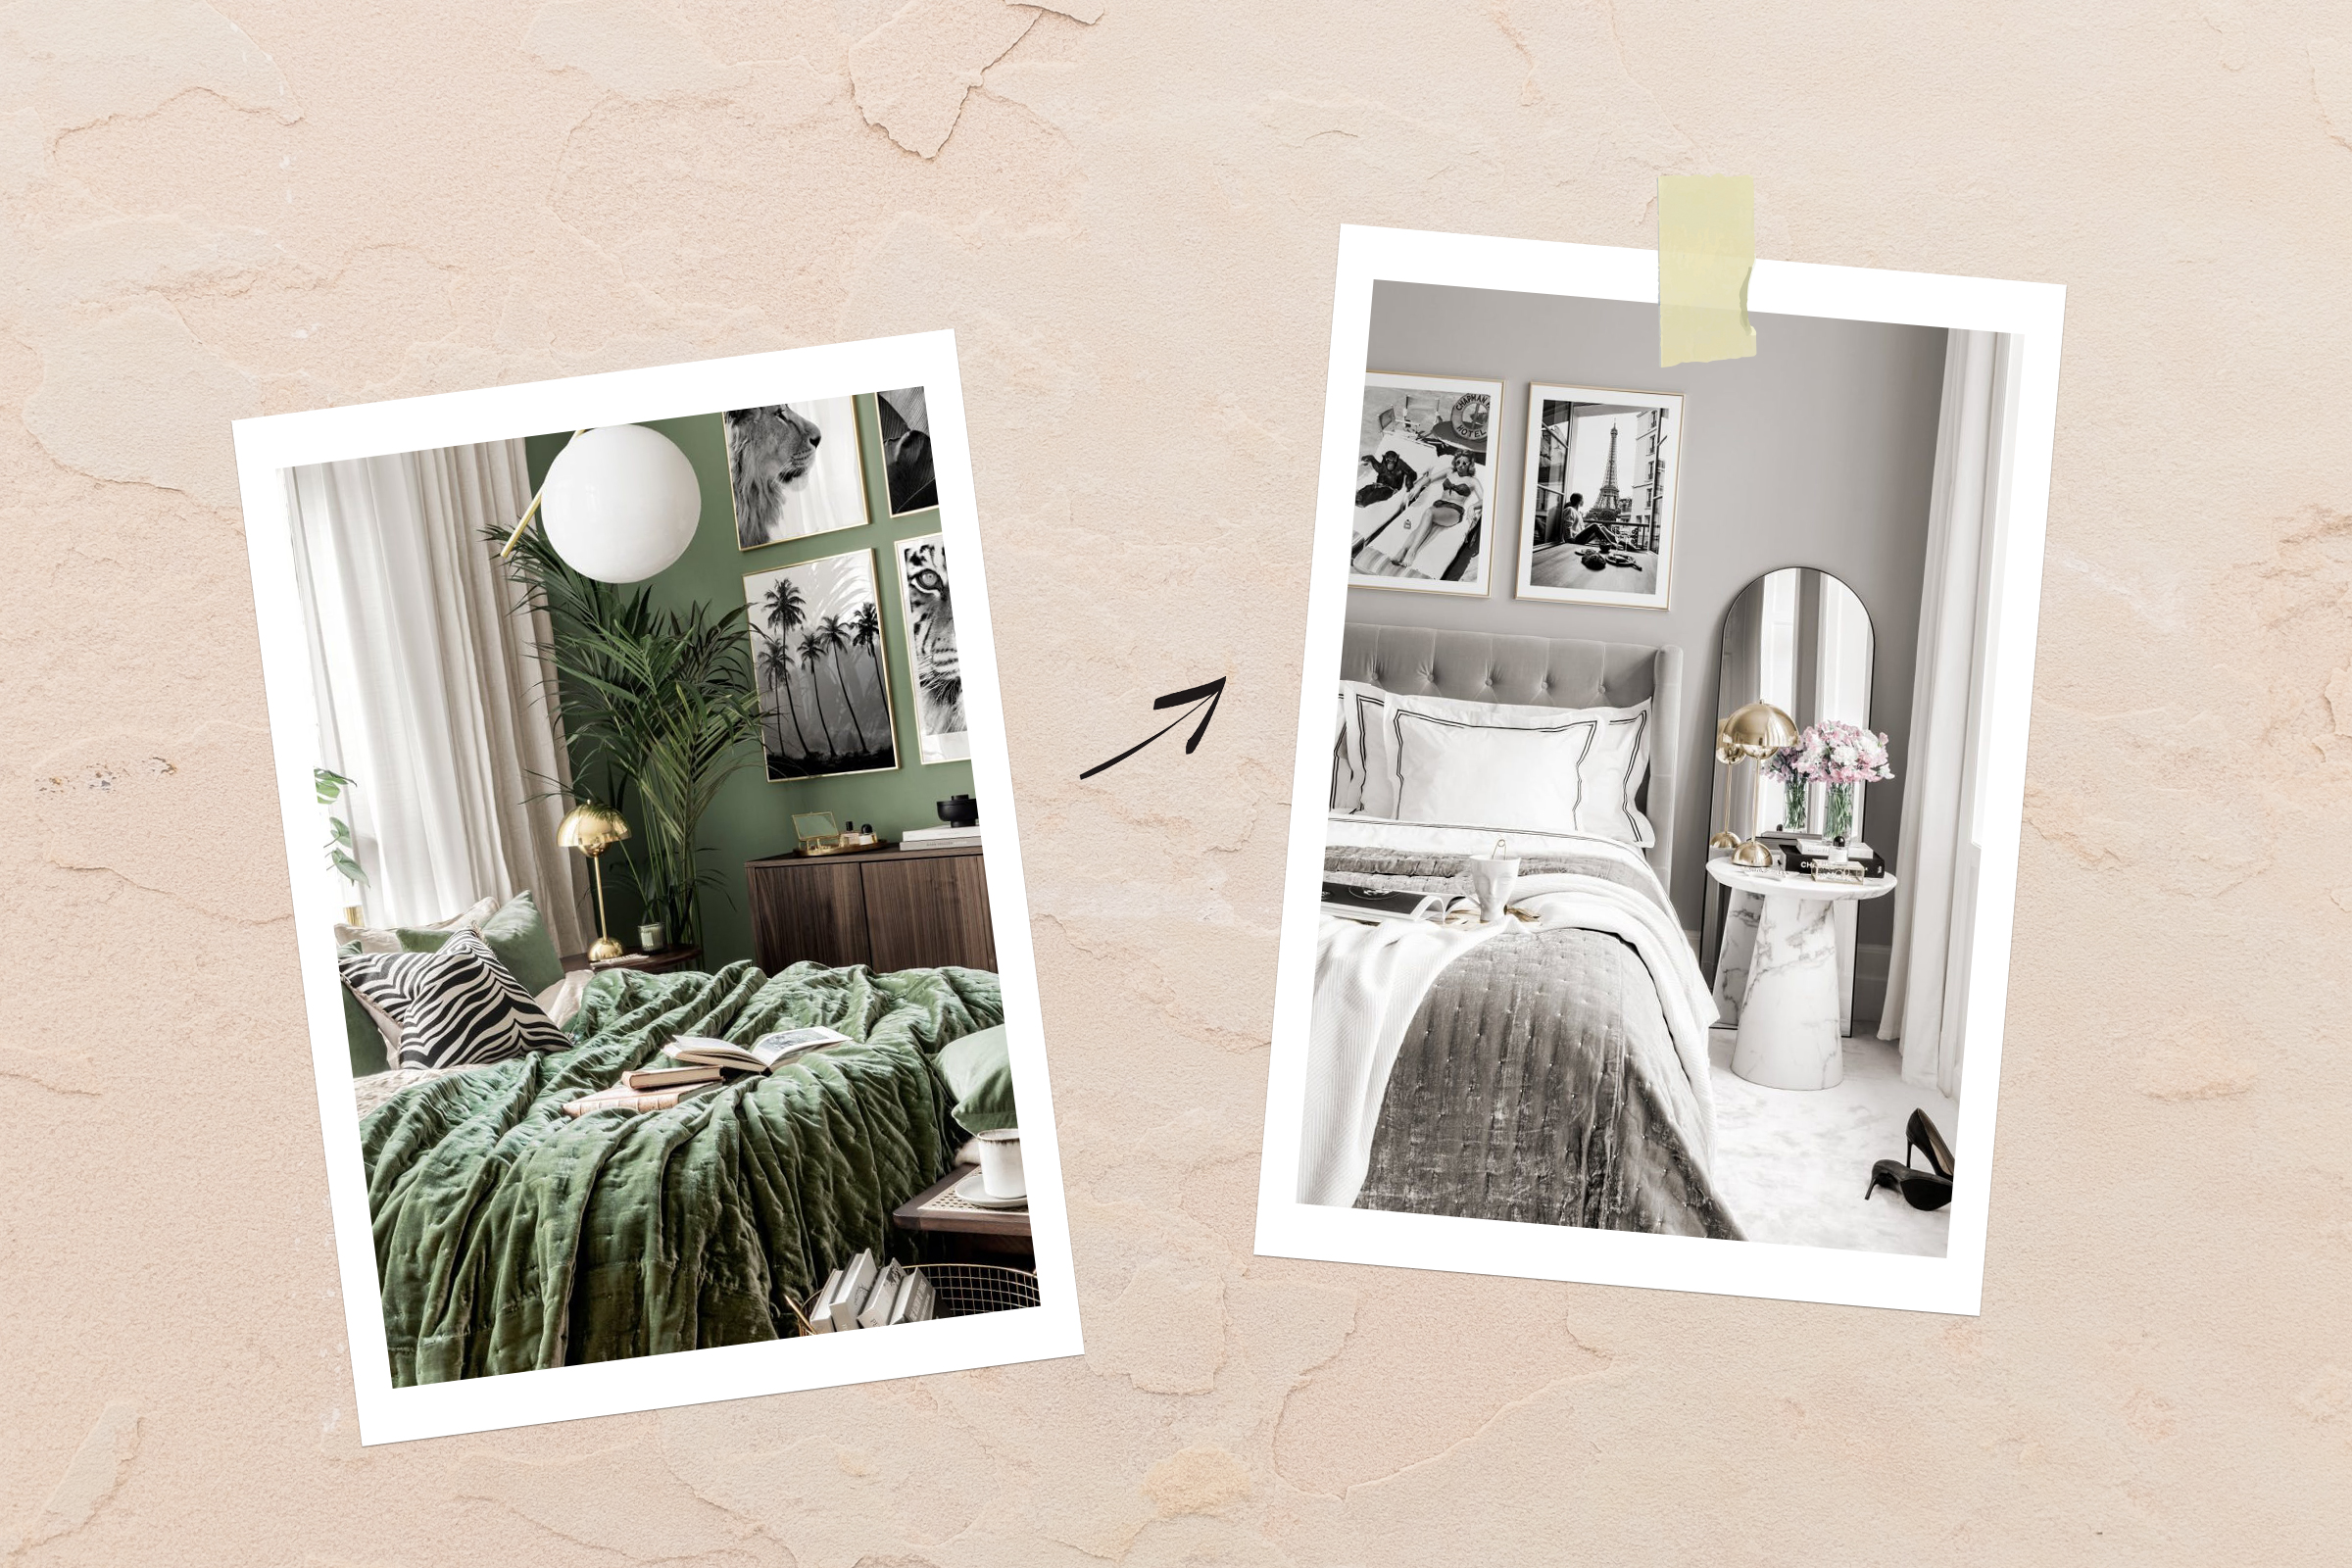 A collage showing two images of luxurious bedrooms, one bedroom is gray and one bedroom is green. 